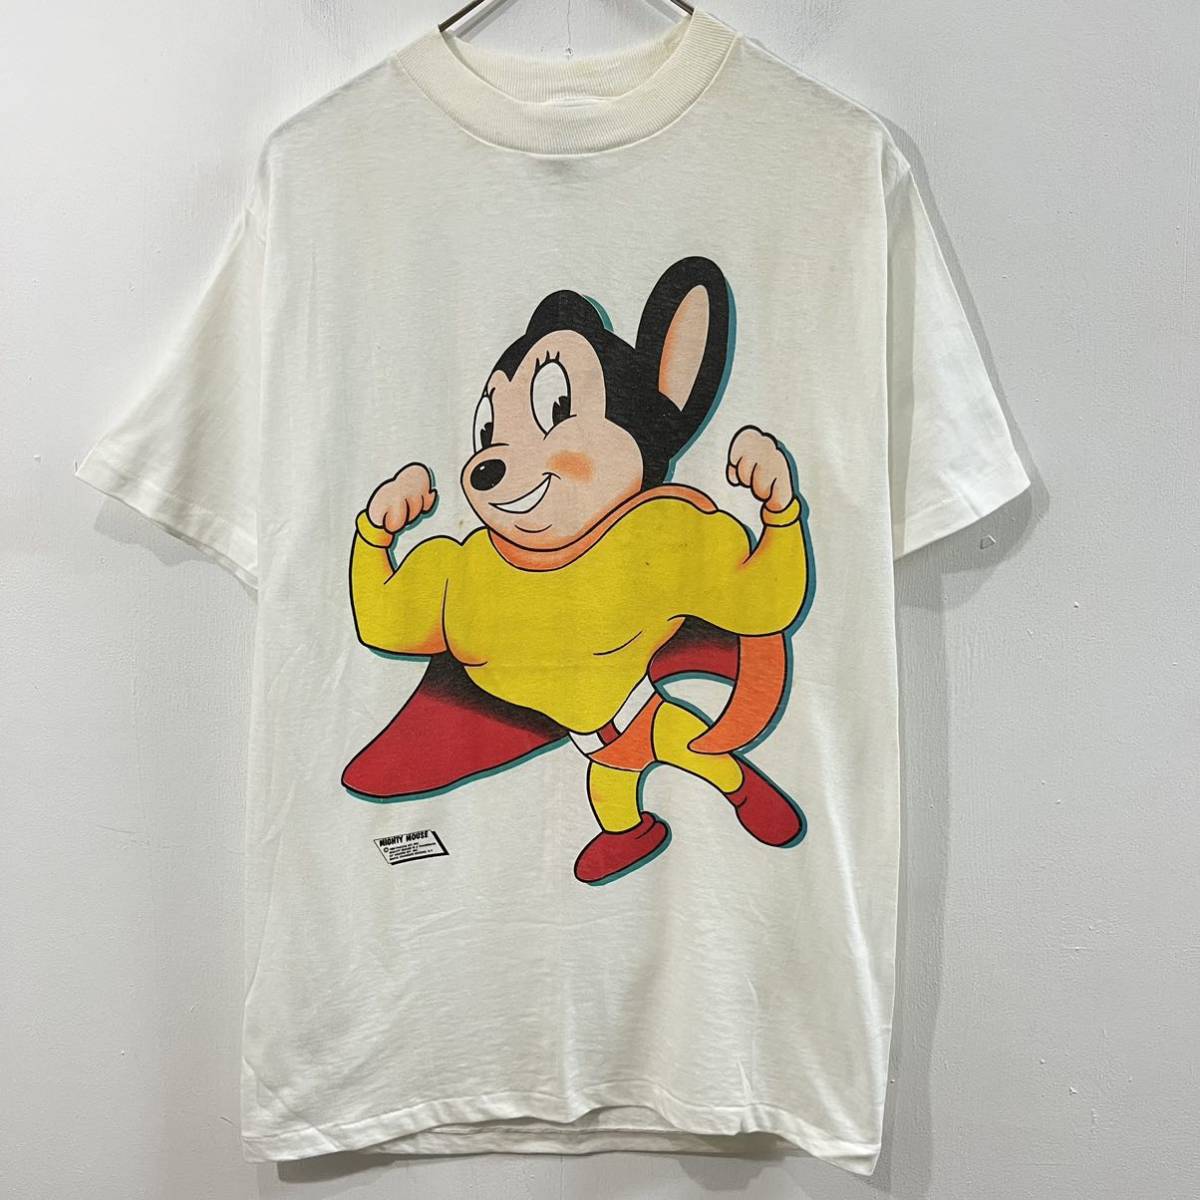 80s VINTAGE USA製 アメリカ製 MIGHTY MOUSE マイティマウス ミッキーマウス 染み込みプリント 半袖 超希少【レターパックライト郵送可】E